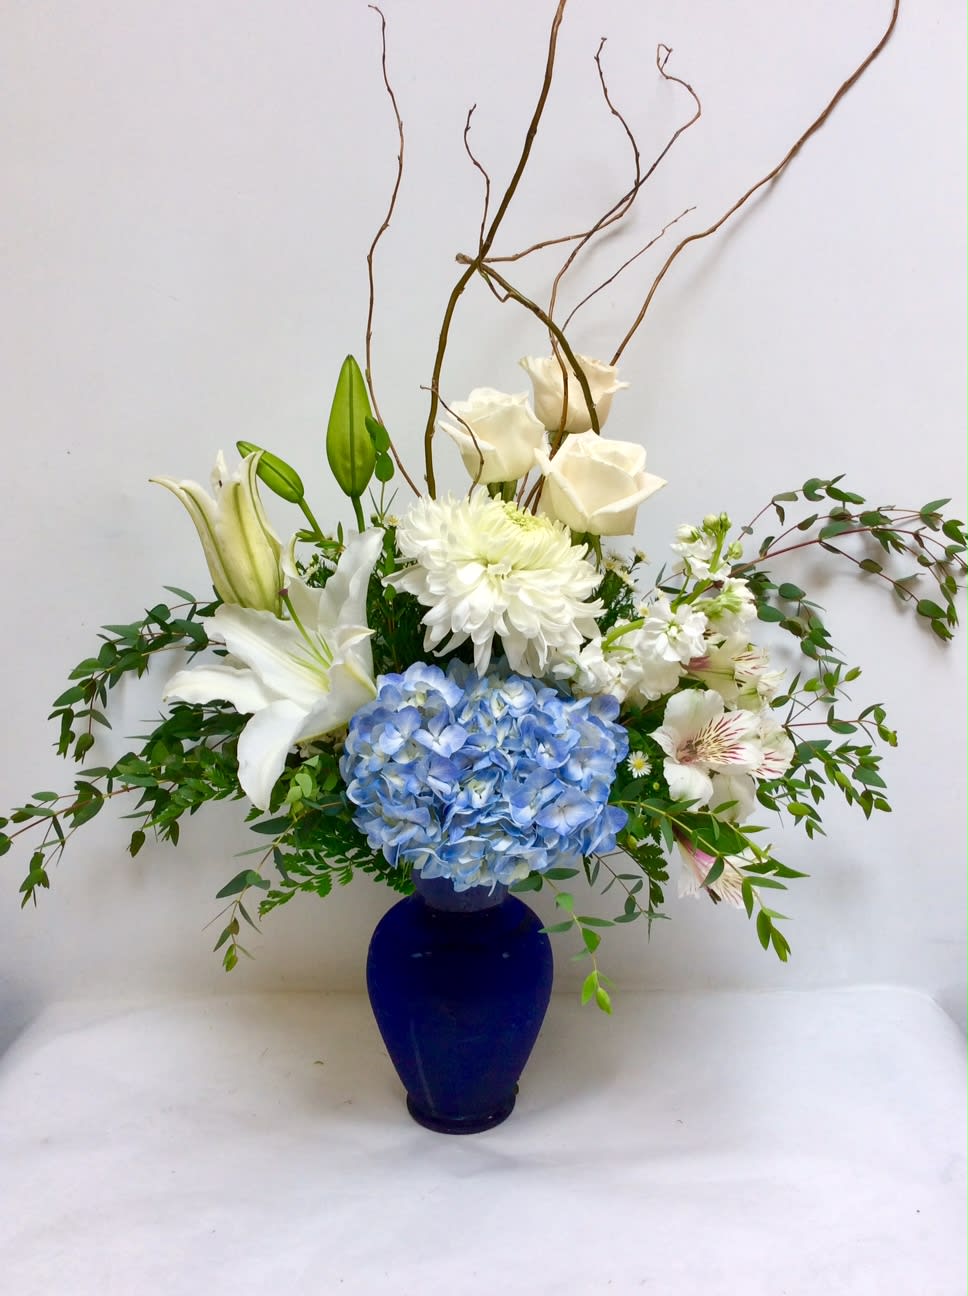 This serene design features a blue vase with white and blue blooms